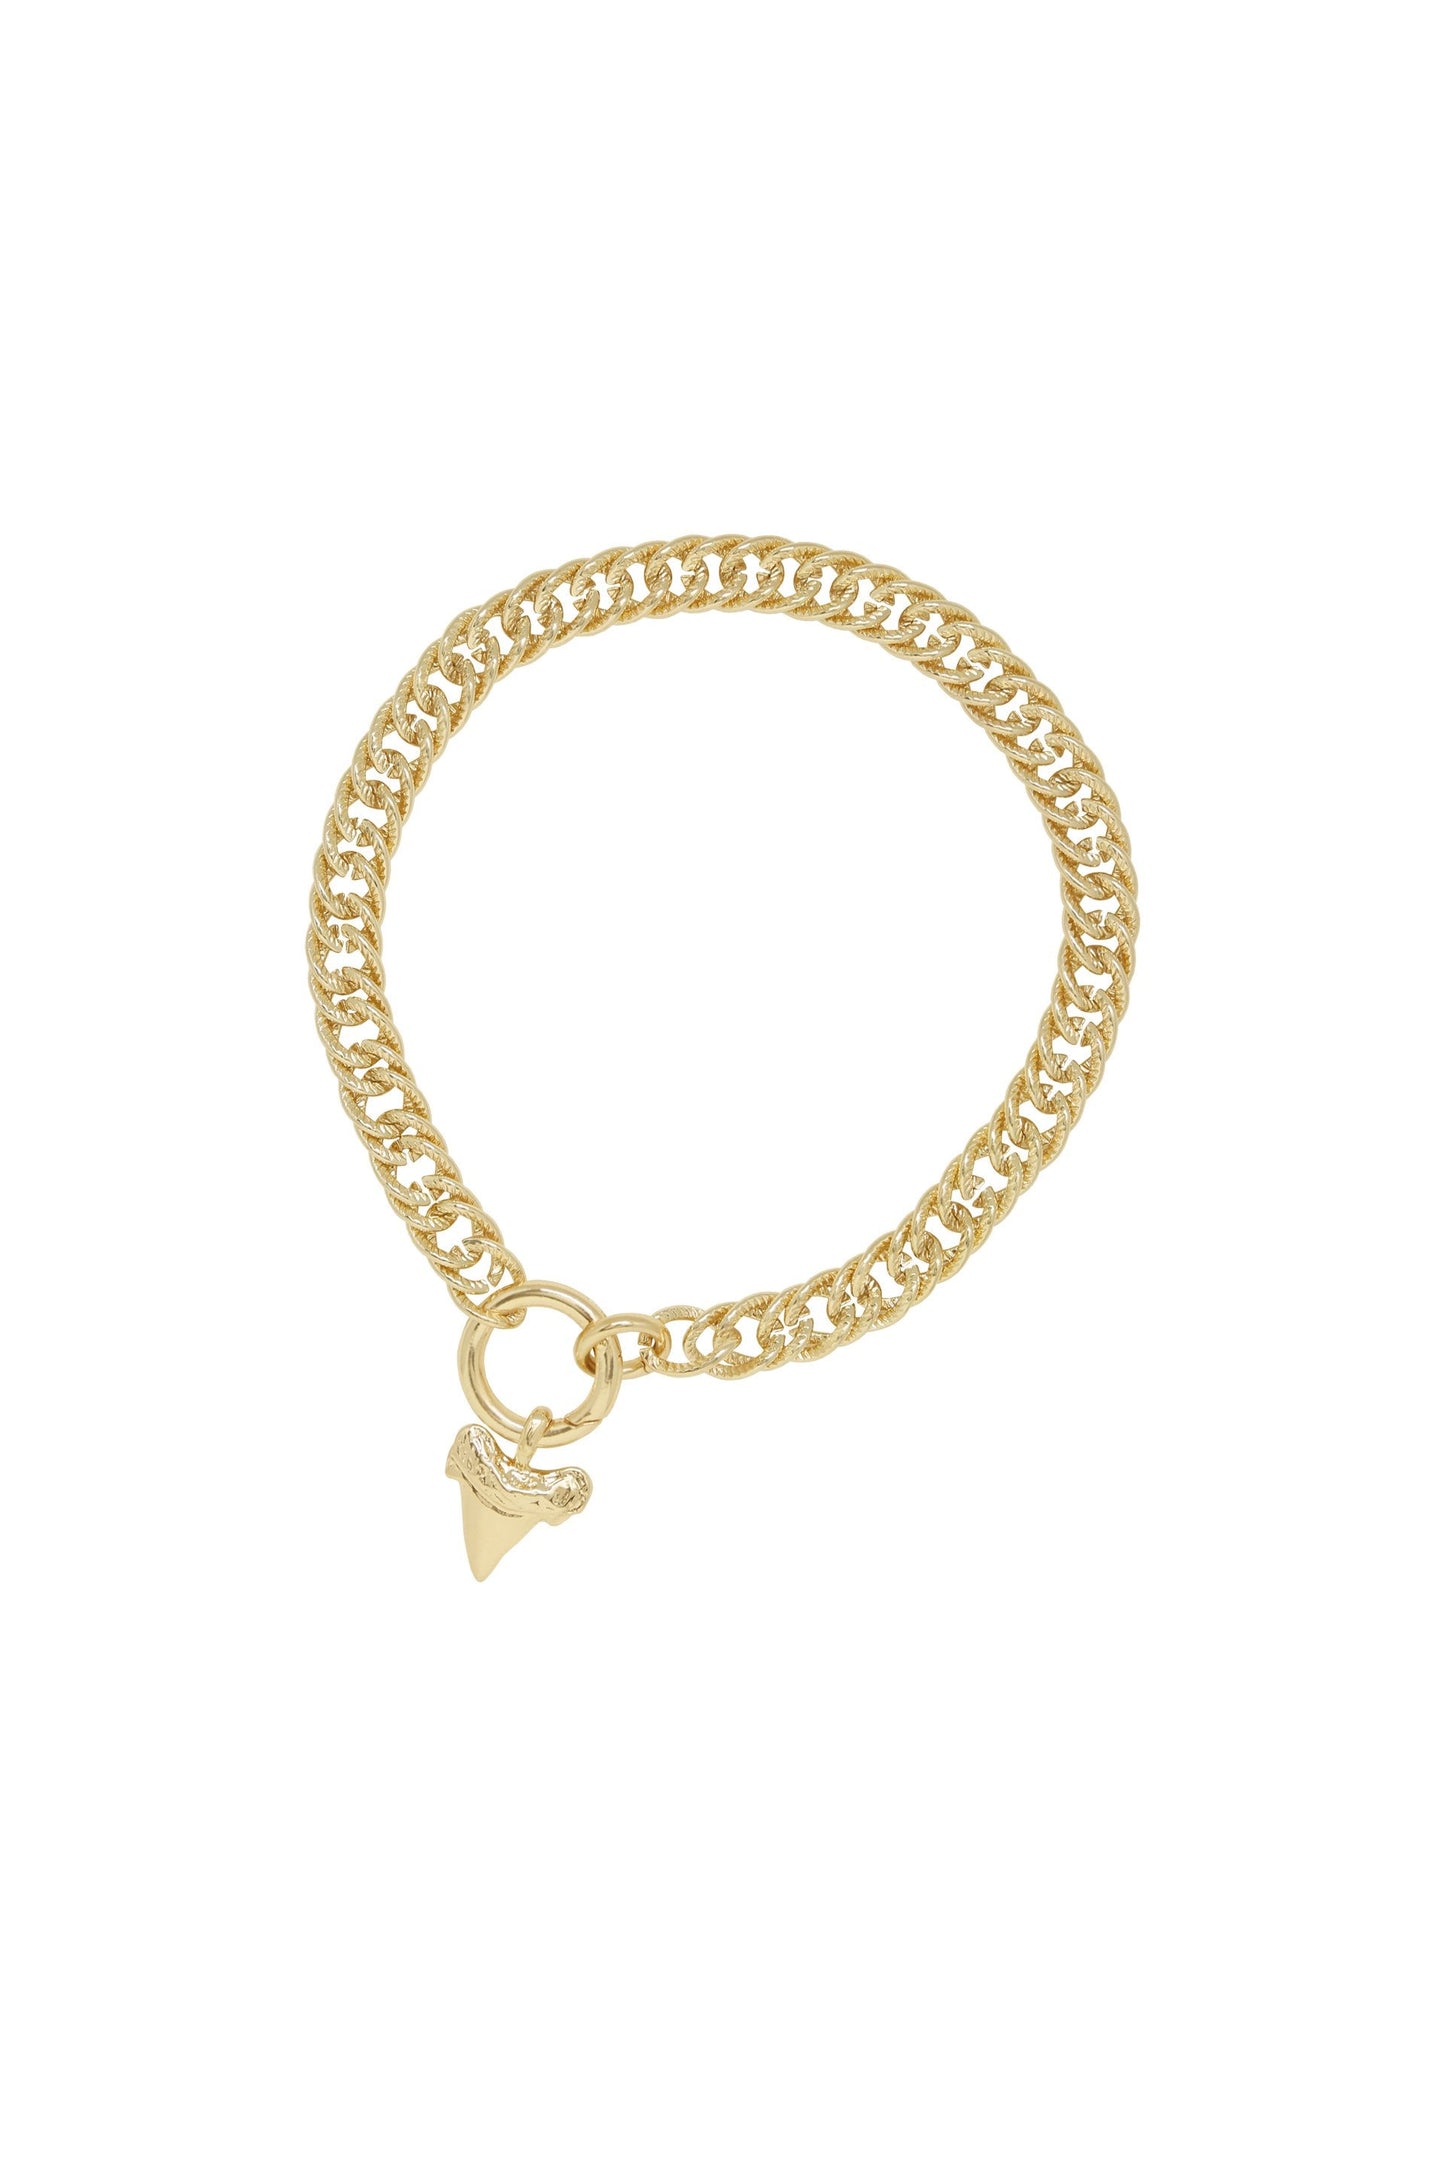 Into the Deep 18k Gold Plated Sharktooth Choker Necklace